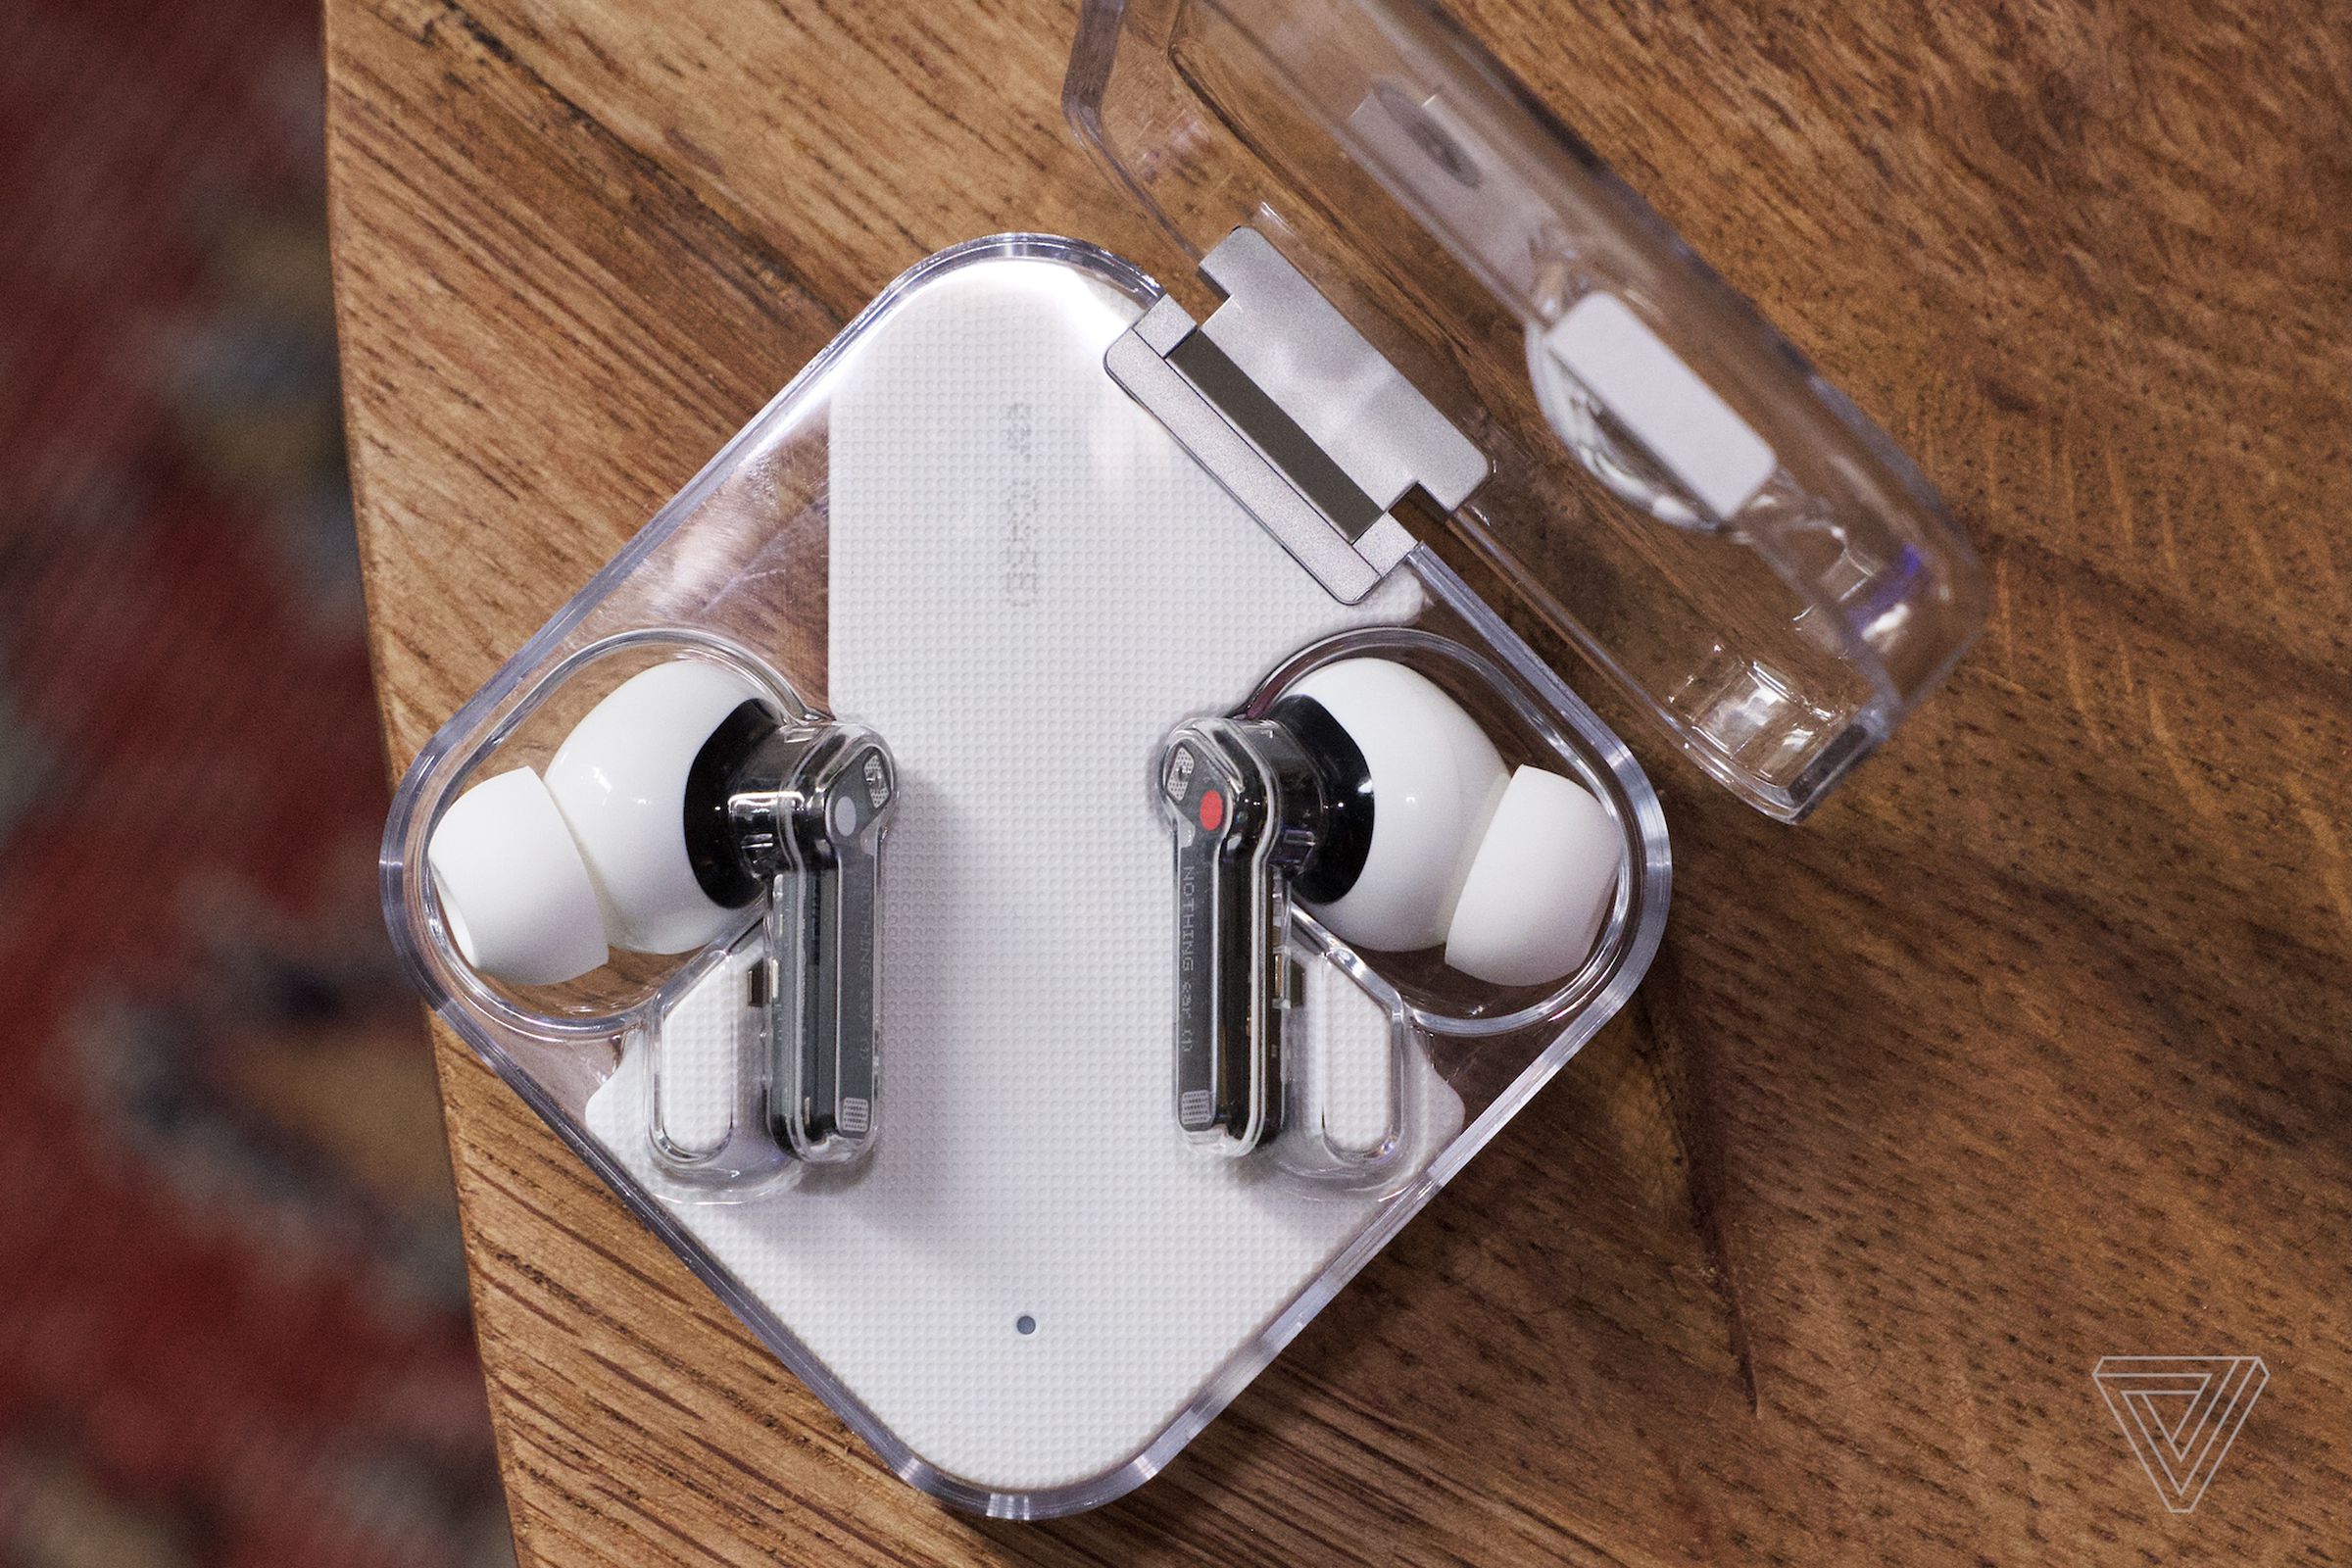 Nothing’s Ear 1s look a lot like the prototype AirPods.